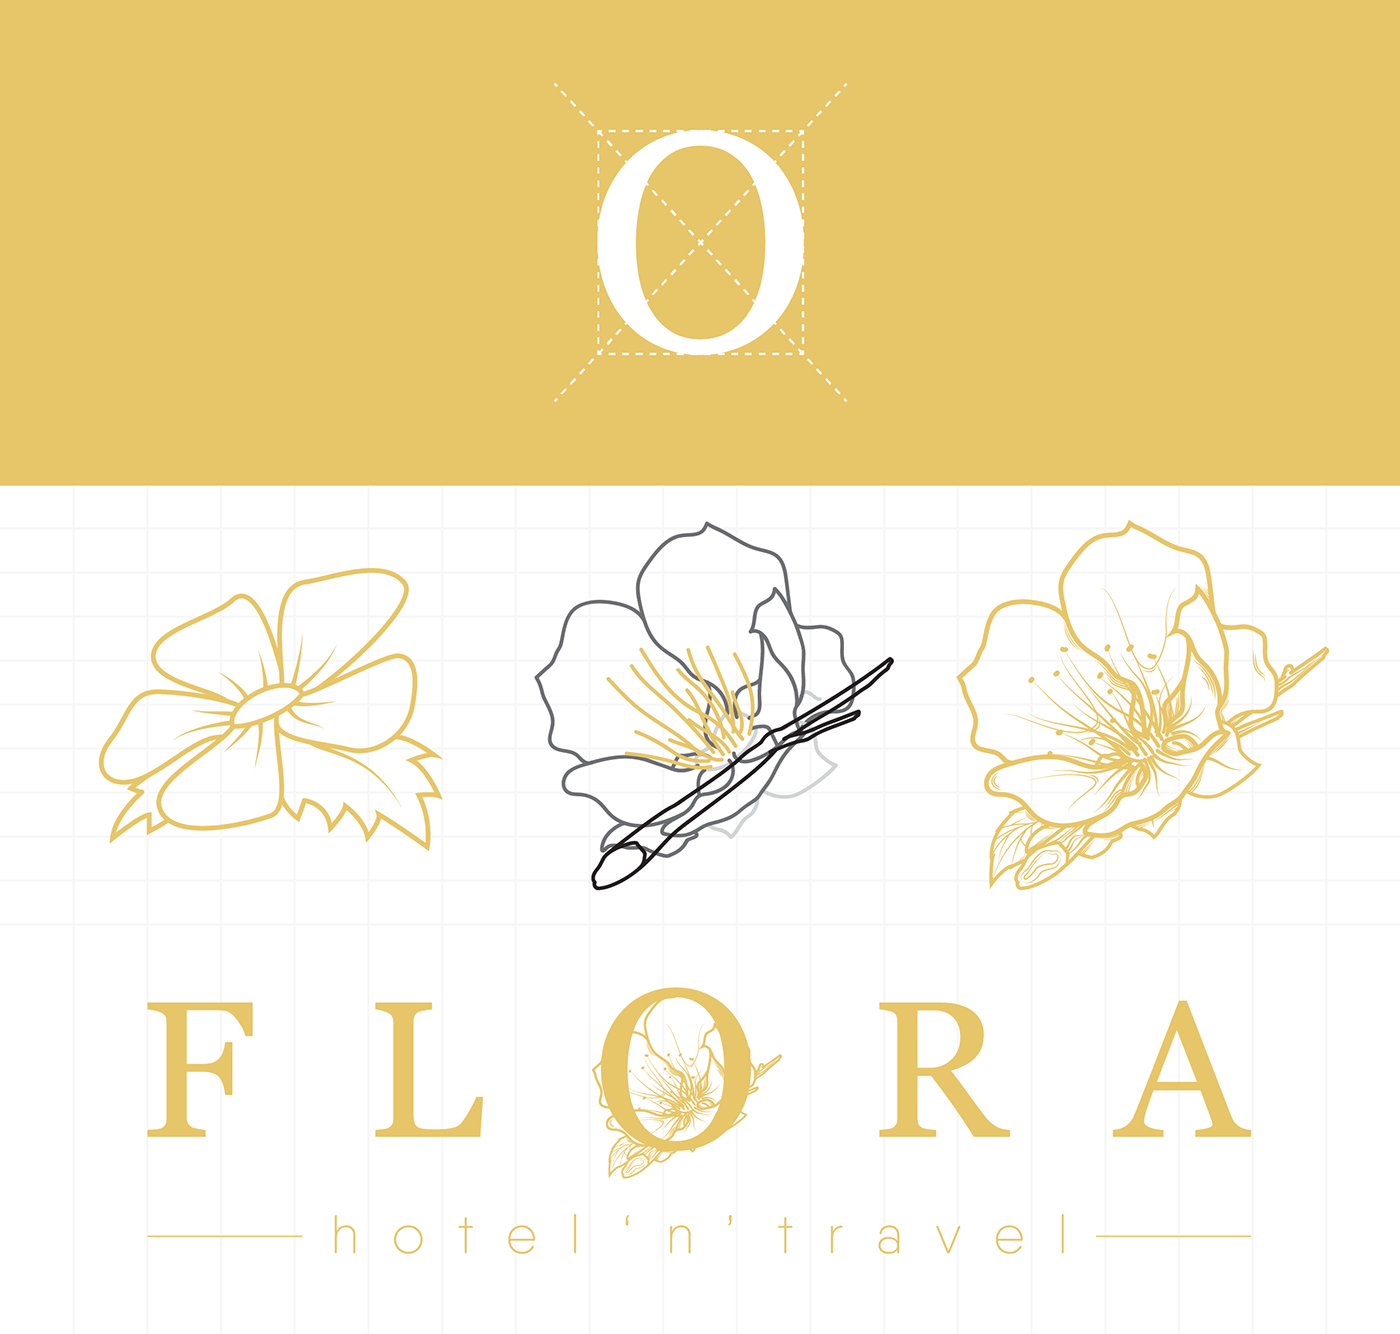 sổ đỏ SD Flora Hotel Hotel & Travel Hospitality flower spiritual Apricot blossom architecture Green and Yellow